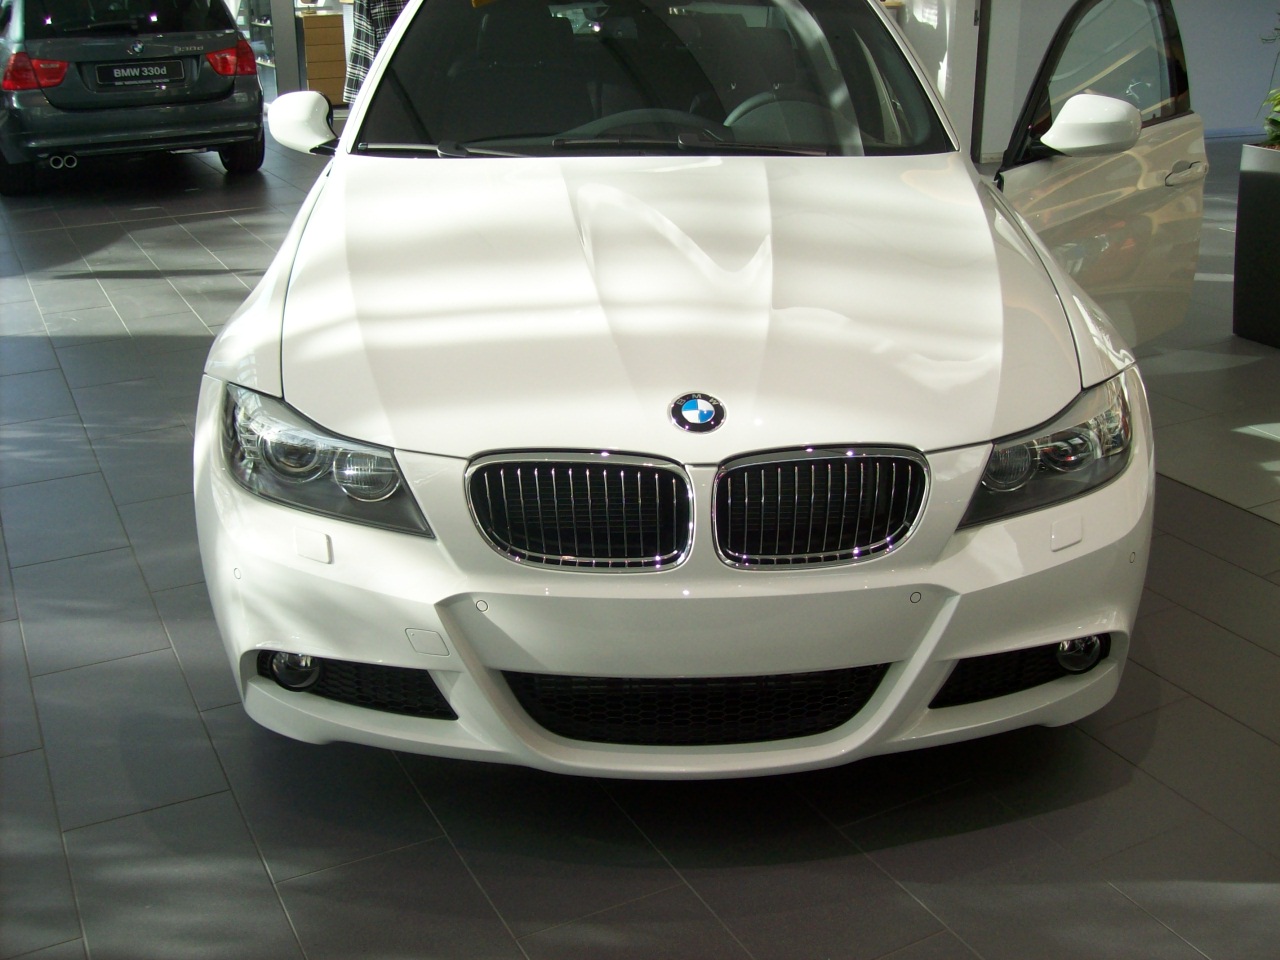 BMW 330xd with the M-